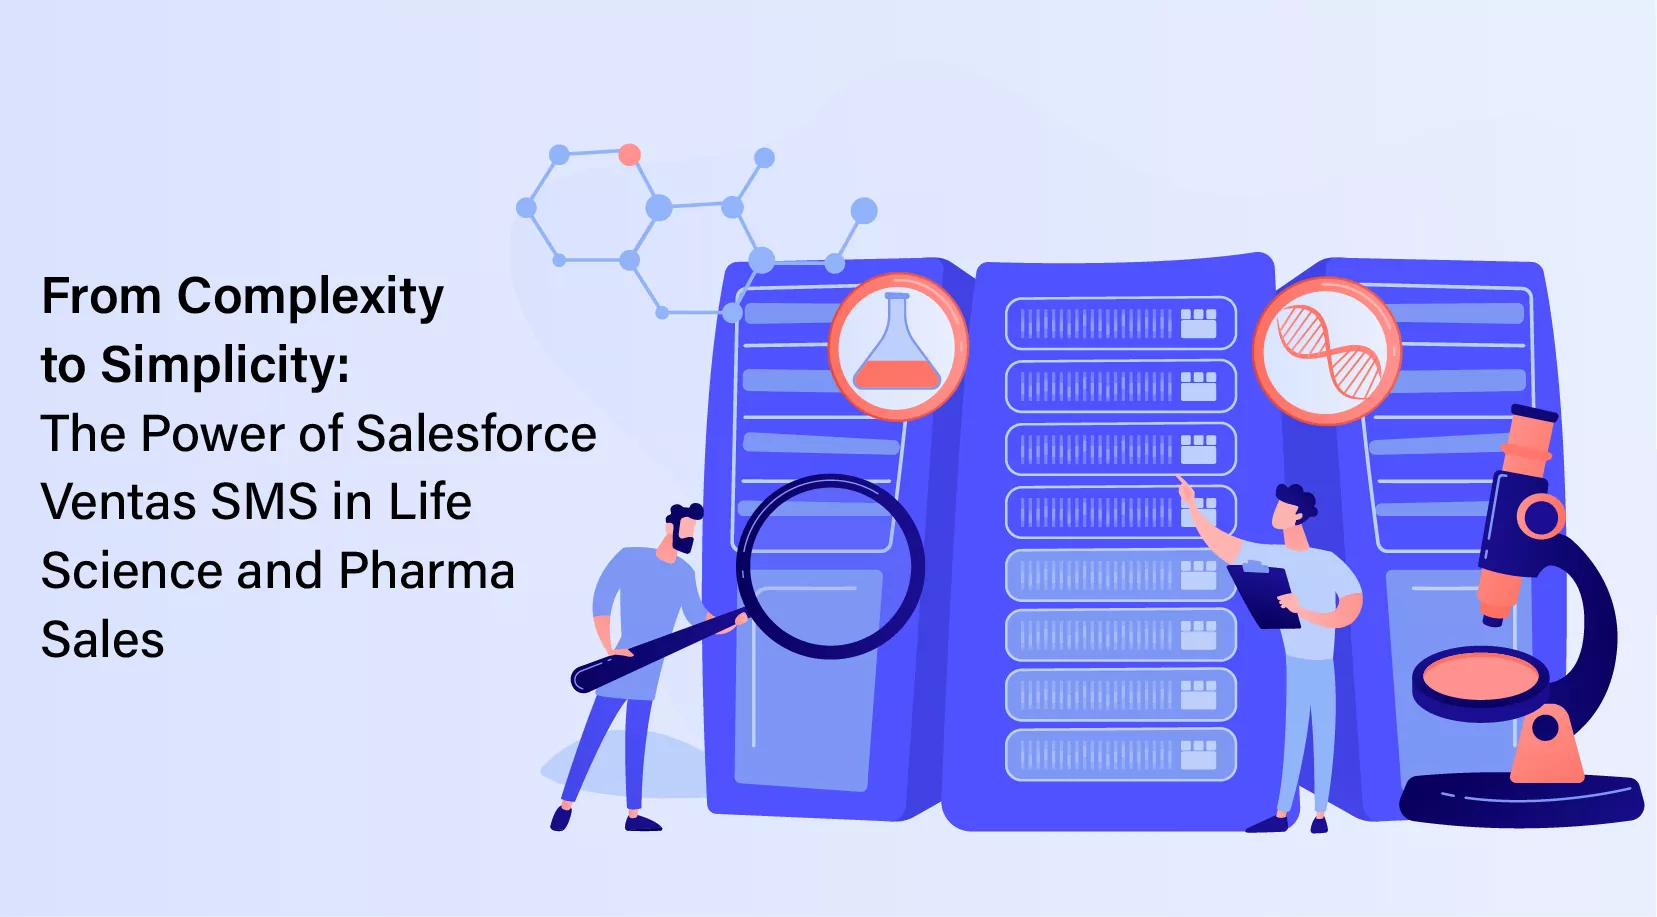 From Complexity to Simplicity: The Power of Salesforce Ventas SMS in Life Science and Pharma Sales